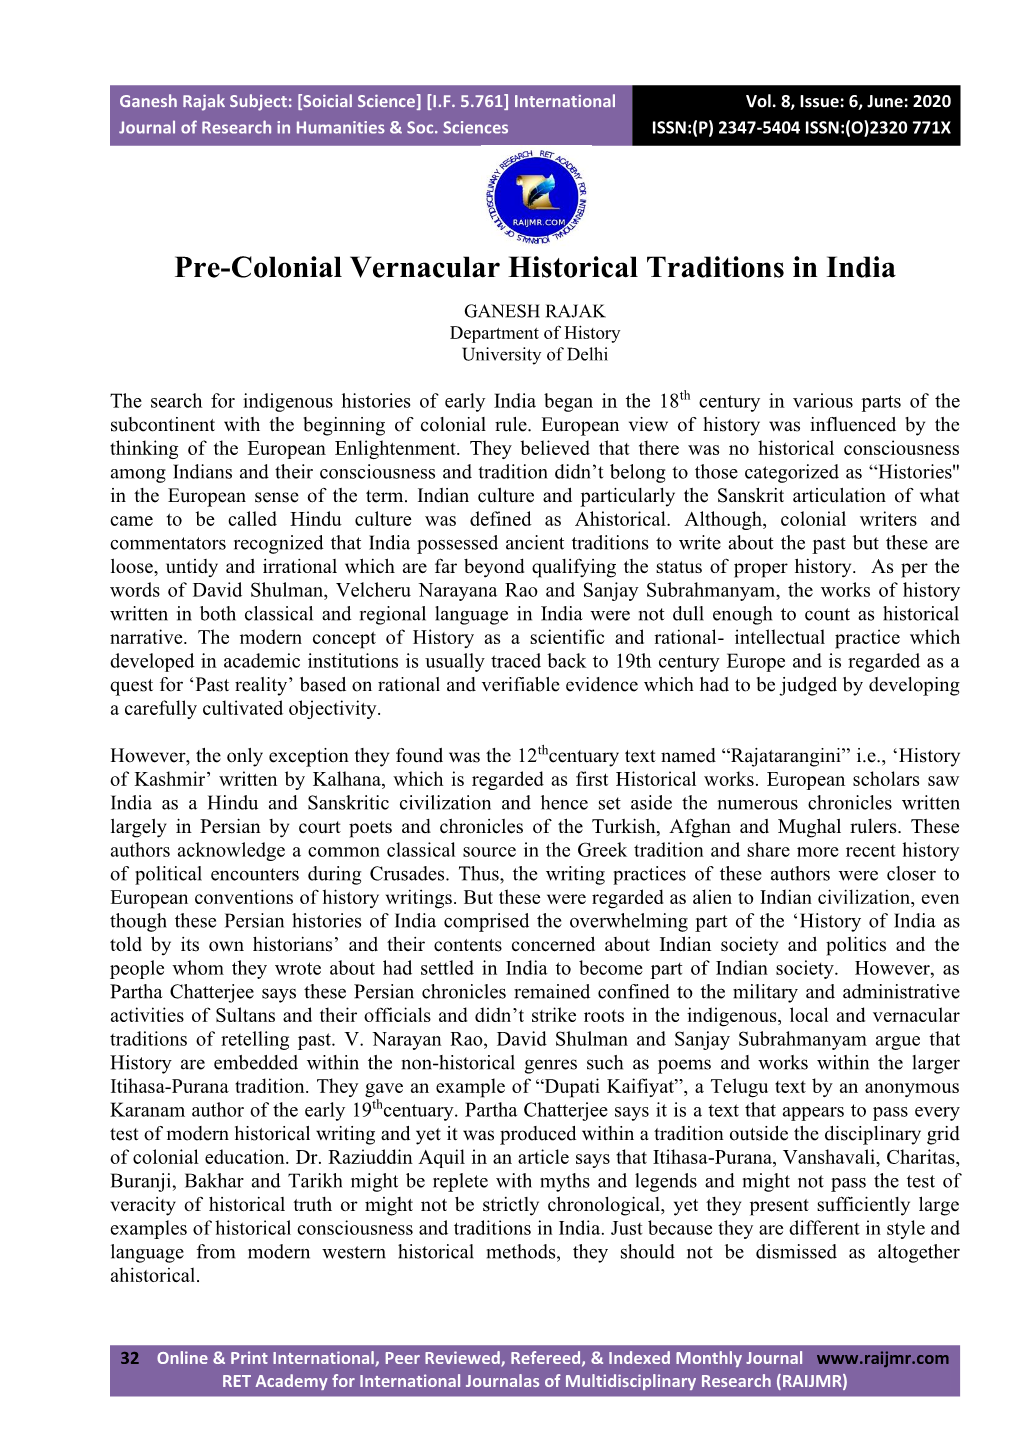 Pre-Colonial Vernacular Historical Traditions in India